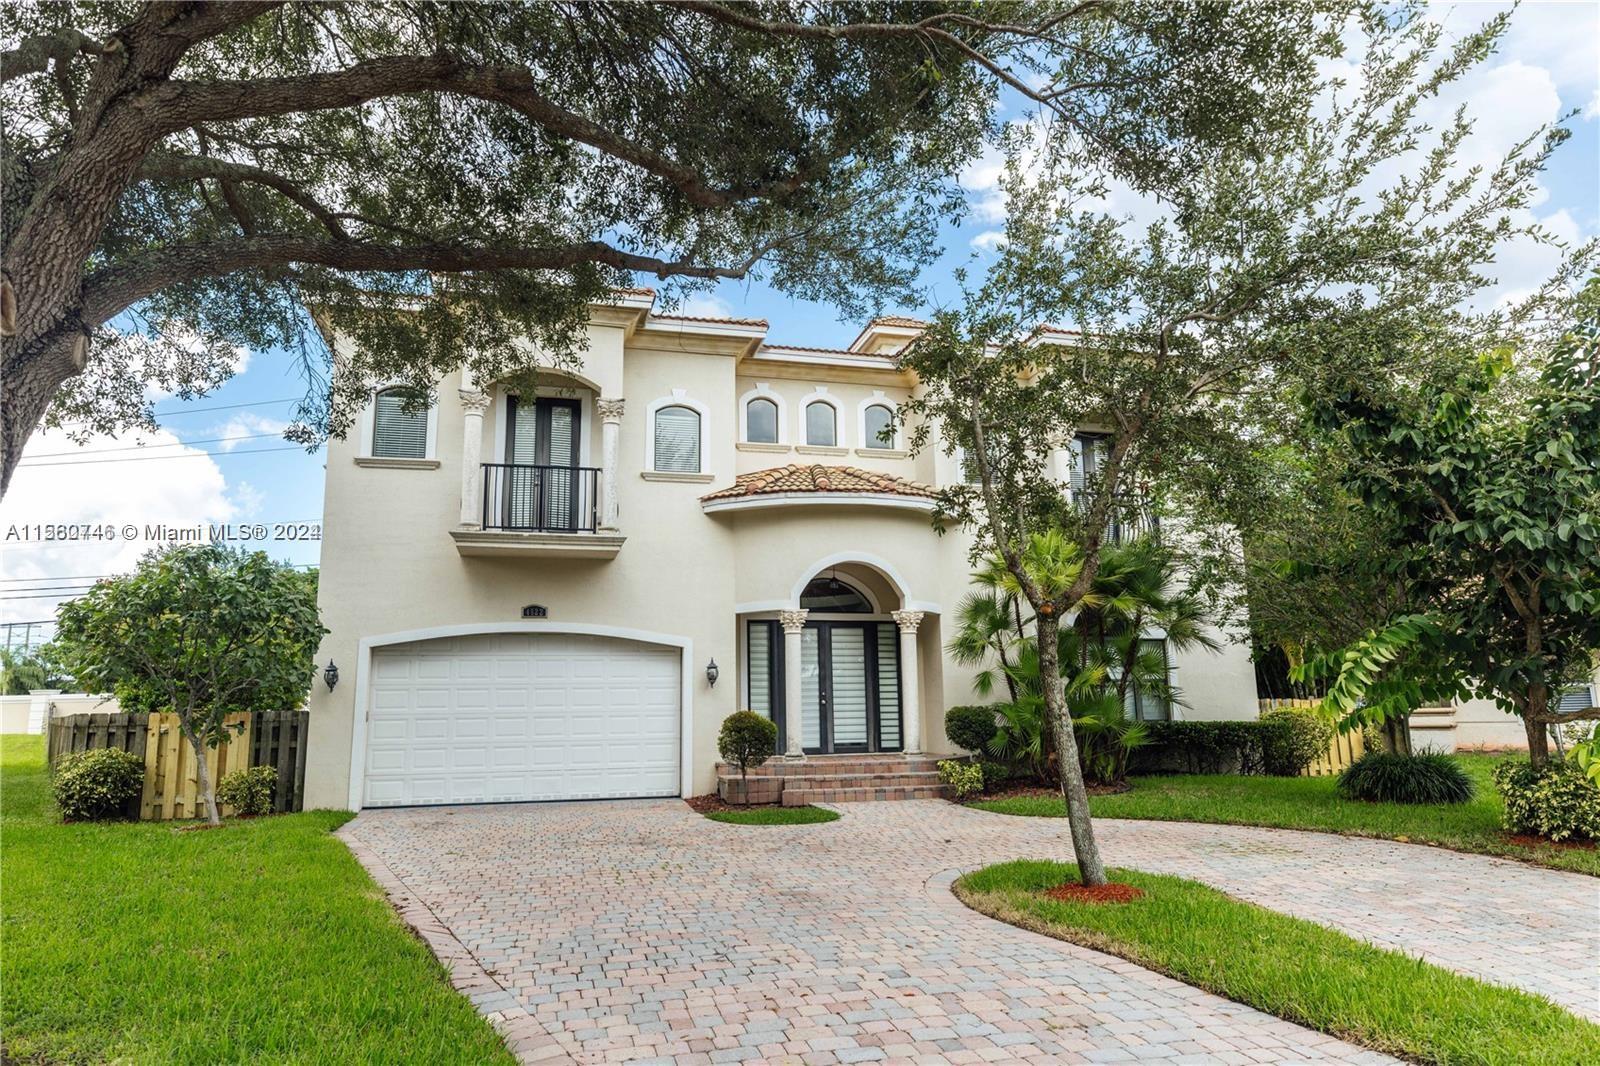 4522 Nw 67th Ave, Coral Springs, Broward County, Florida - 5 Bedrooms  
4 Bathrooms - 